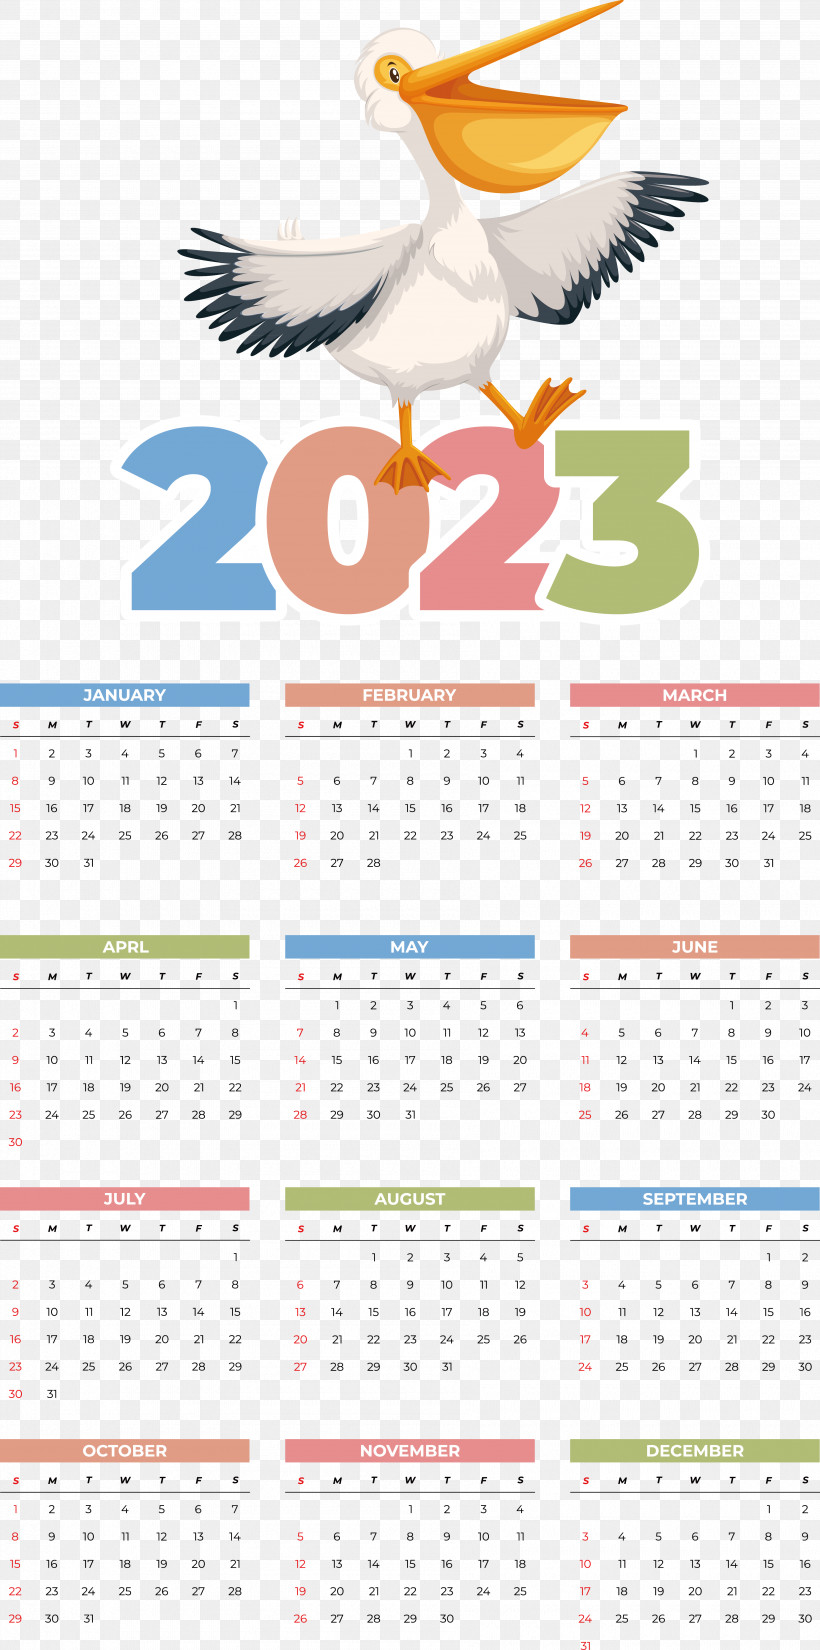 Calendar 2023 Vector 2022, PNG, 3580x7206px, Calendar, Drawing, Free, March, May Download Free